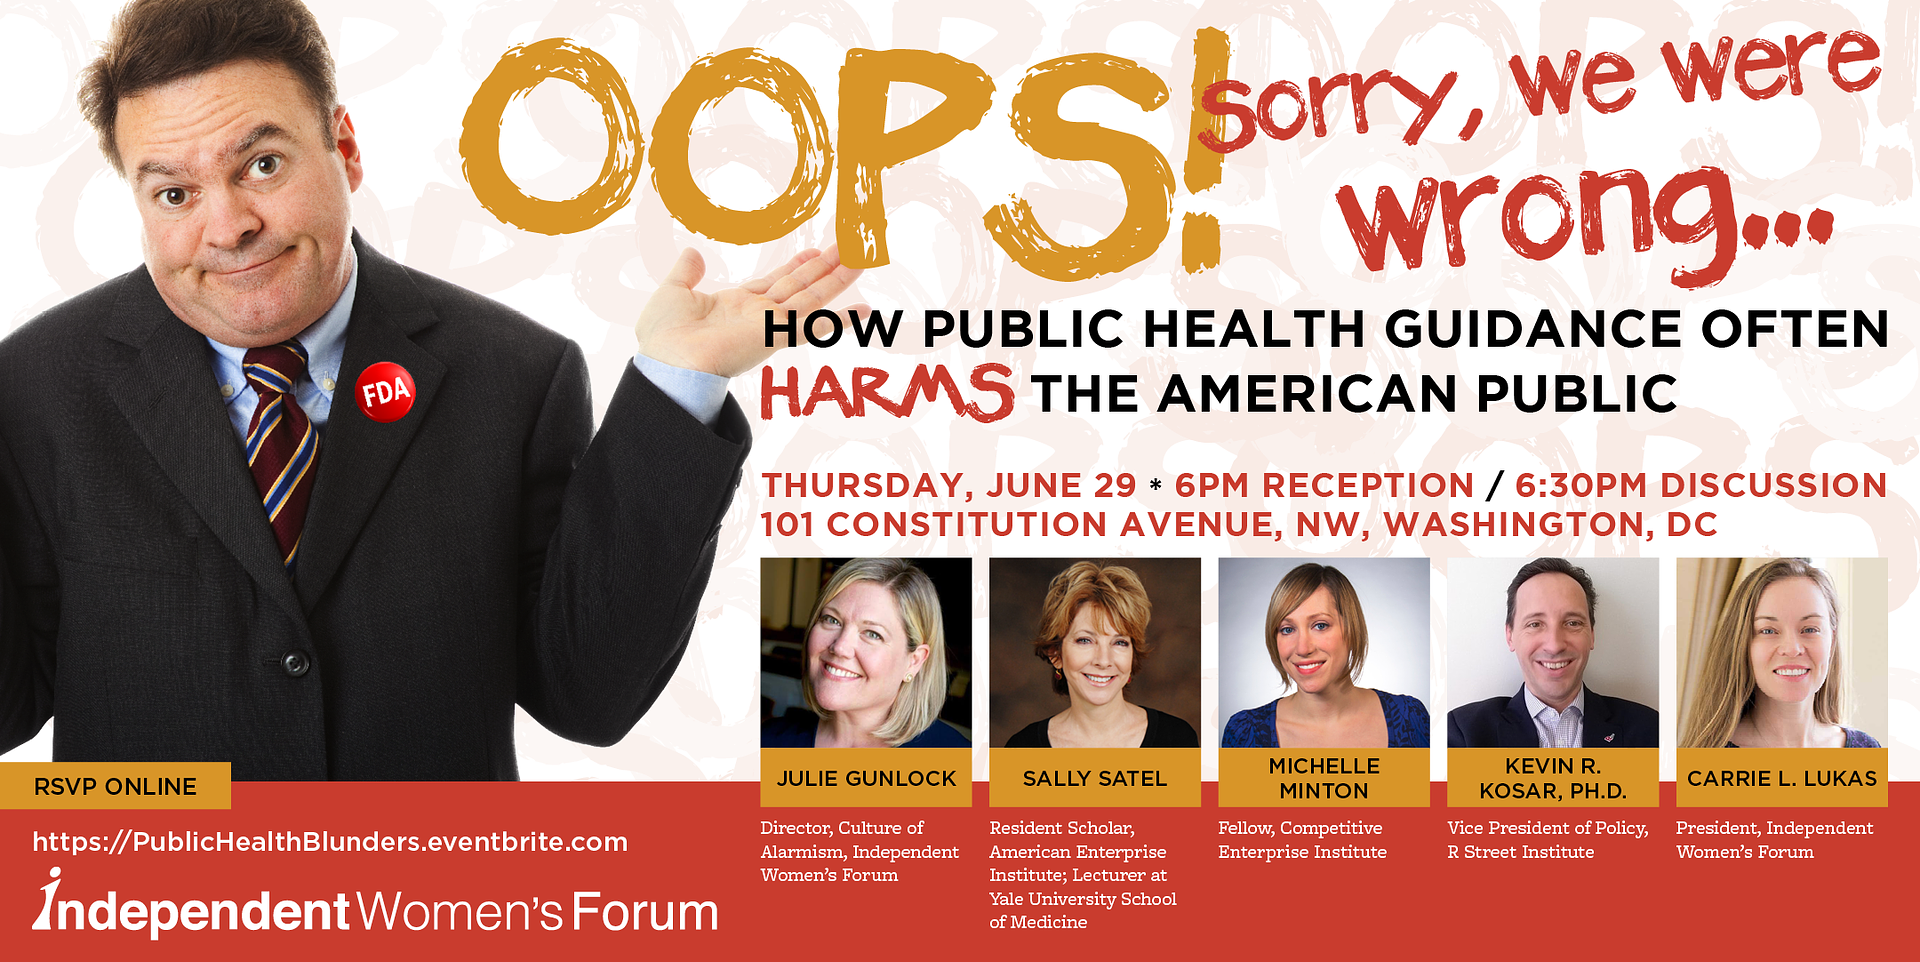 https://www.eventbrite.com/e/oops-sorry-we-were-wronghow-public-health-guidance-often-harms-the-american-public-tickets-34835368525